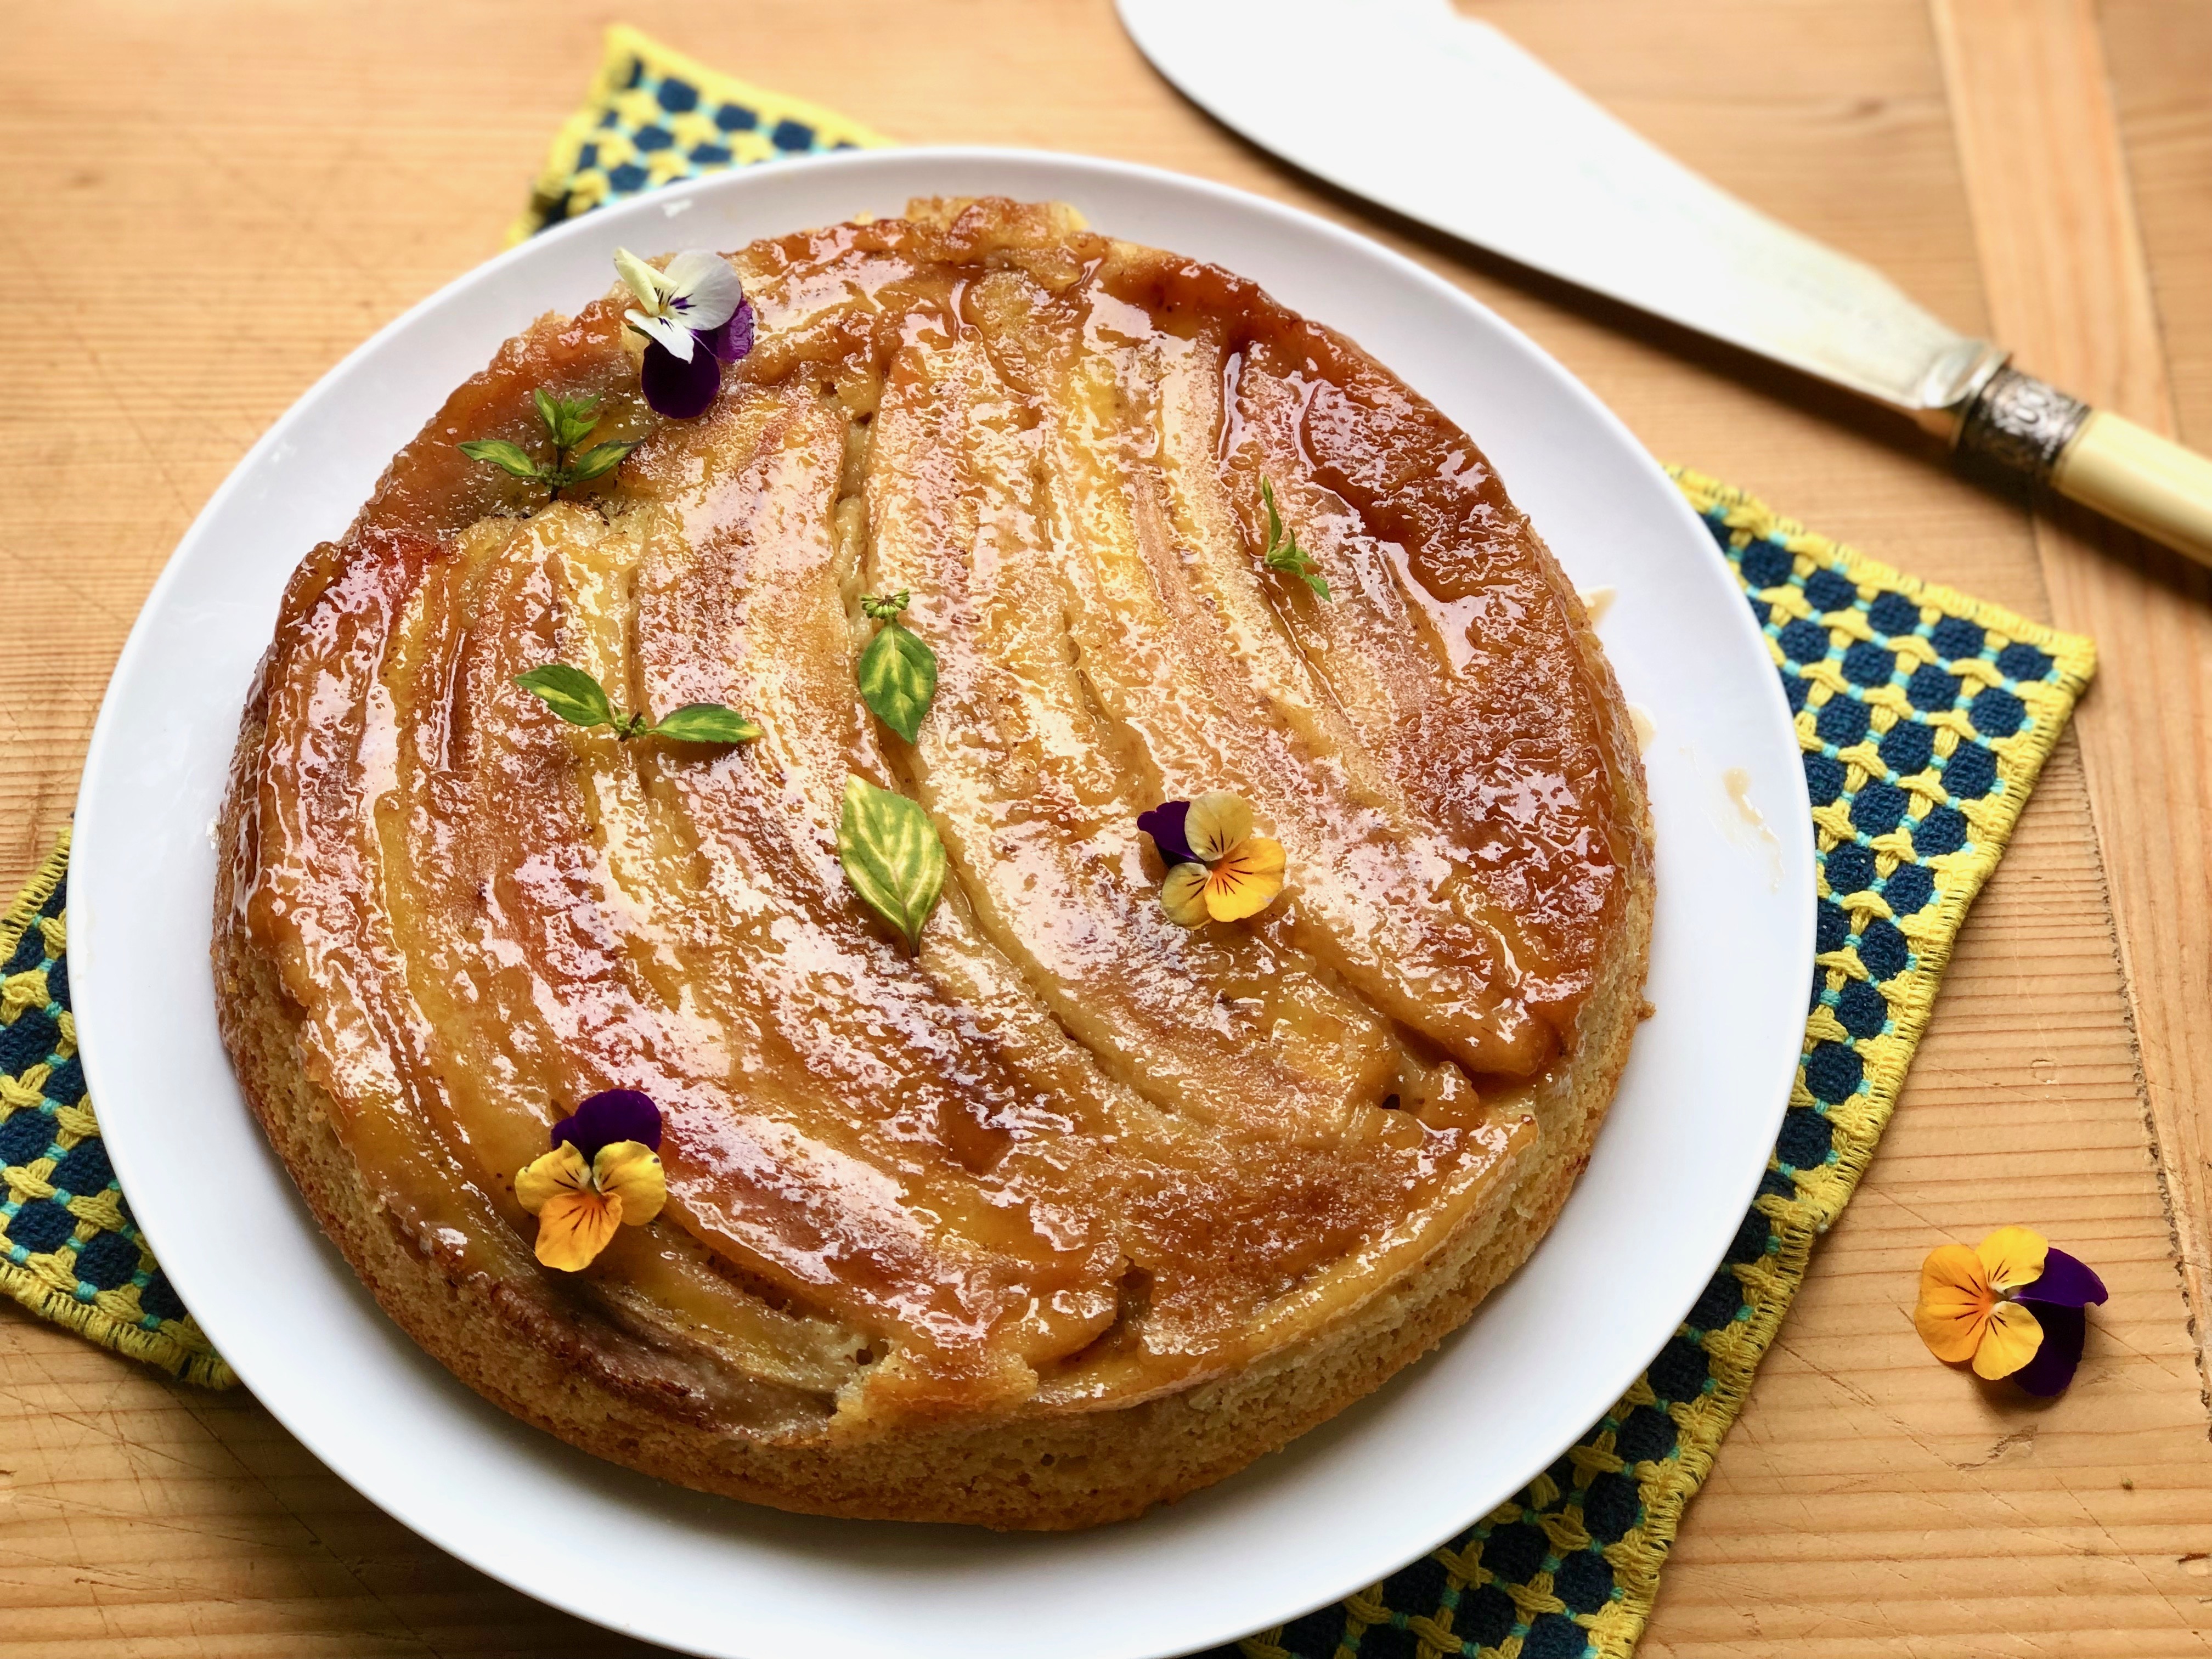 Featured image for “Upside-Down Banana Cake”